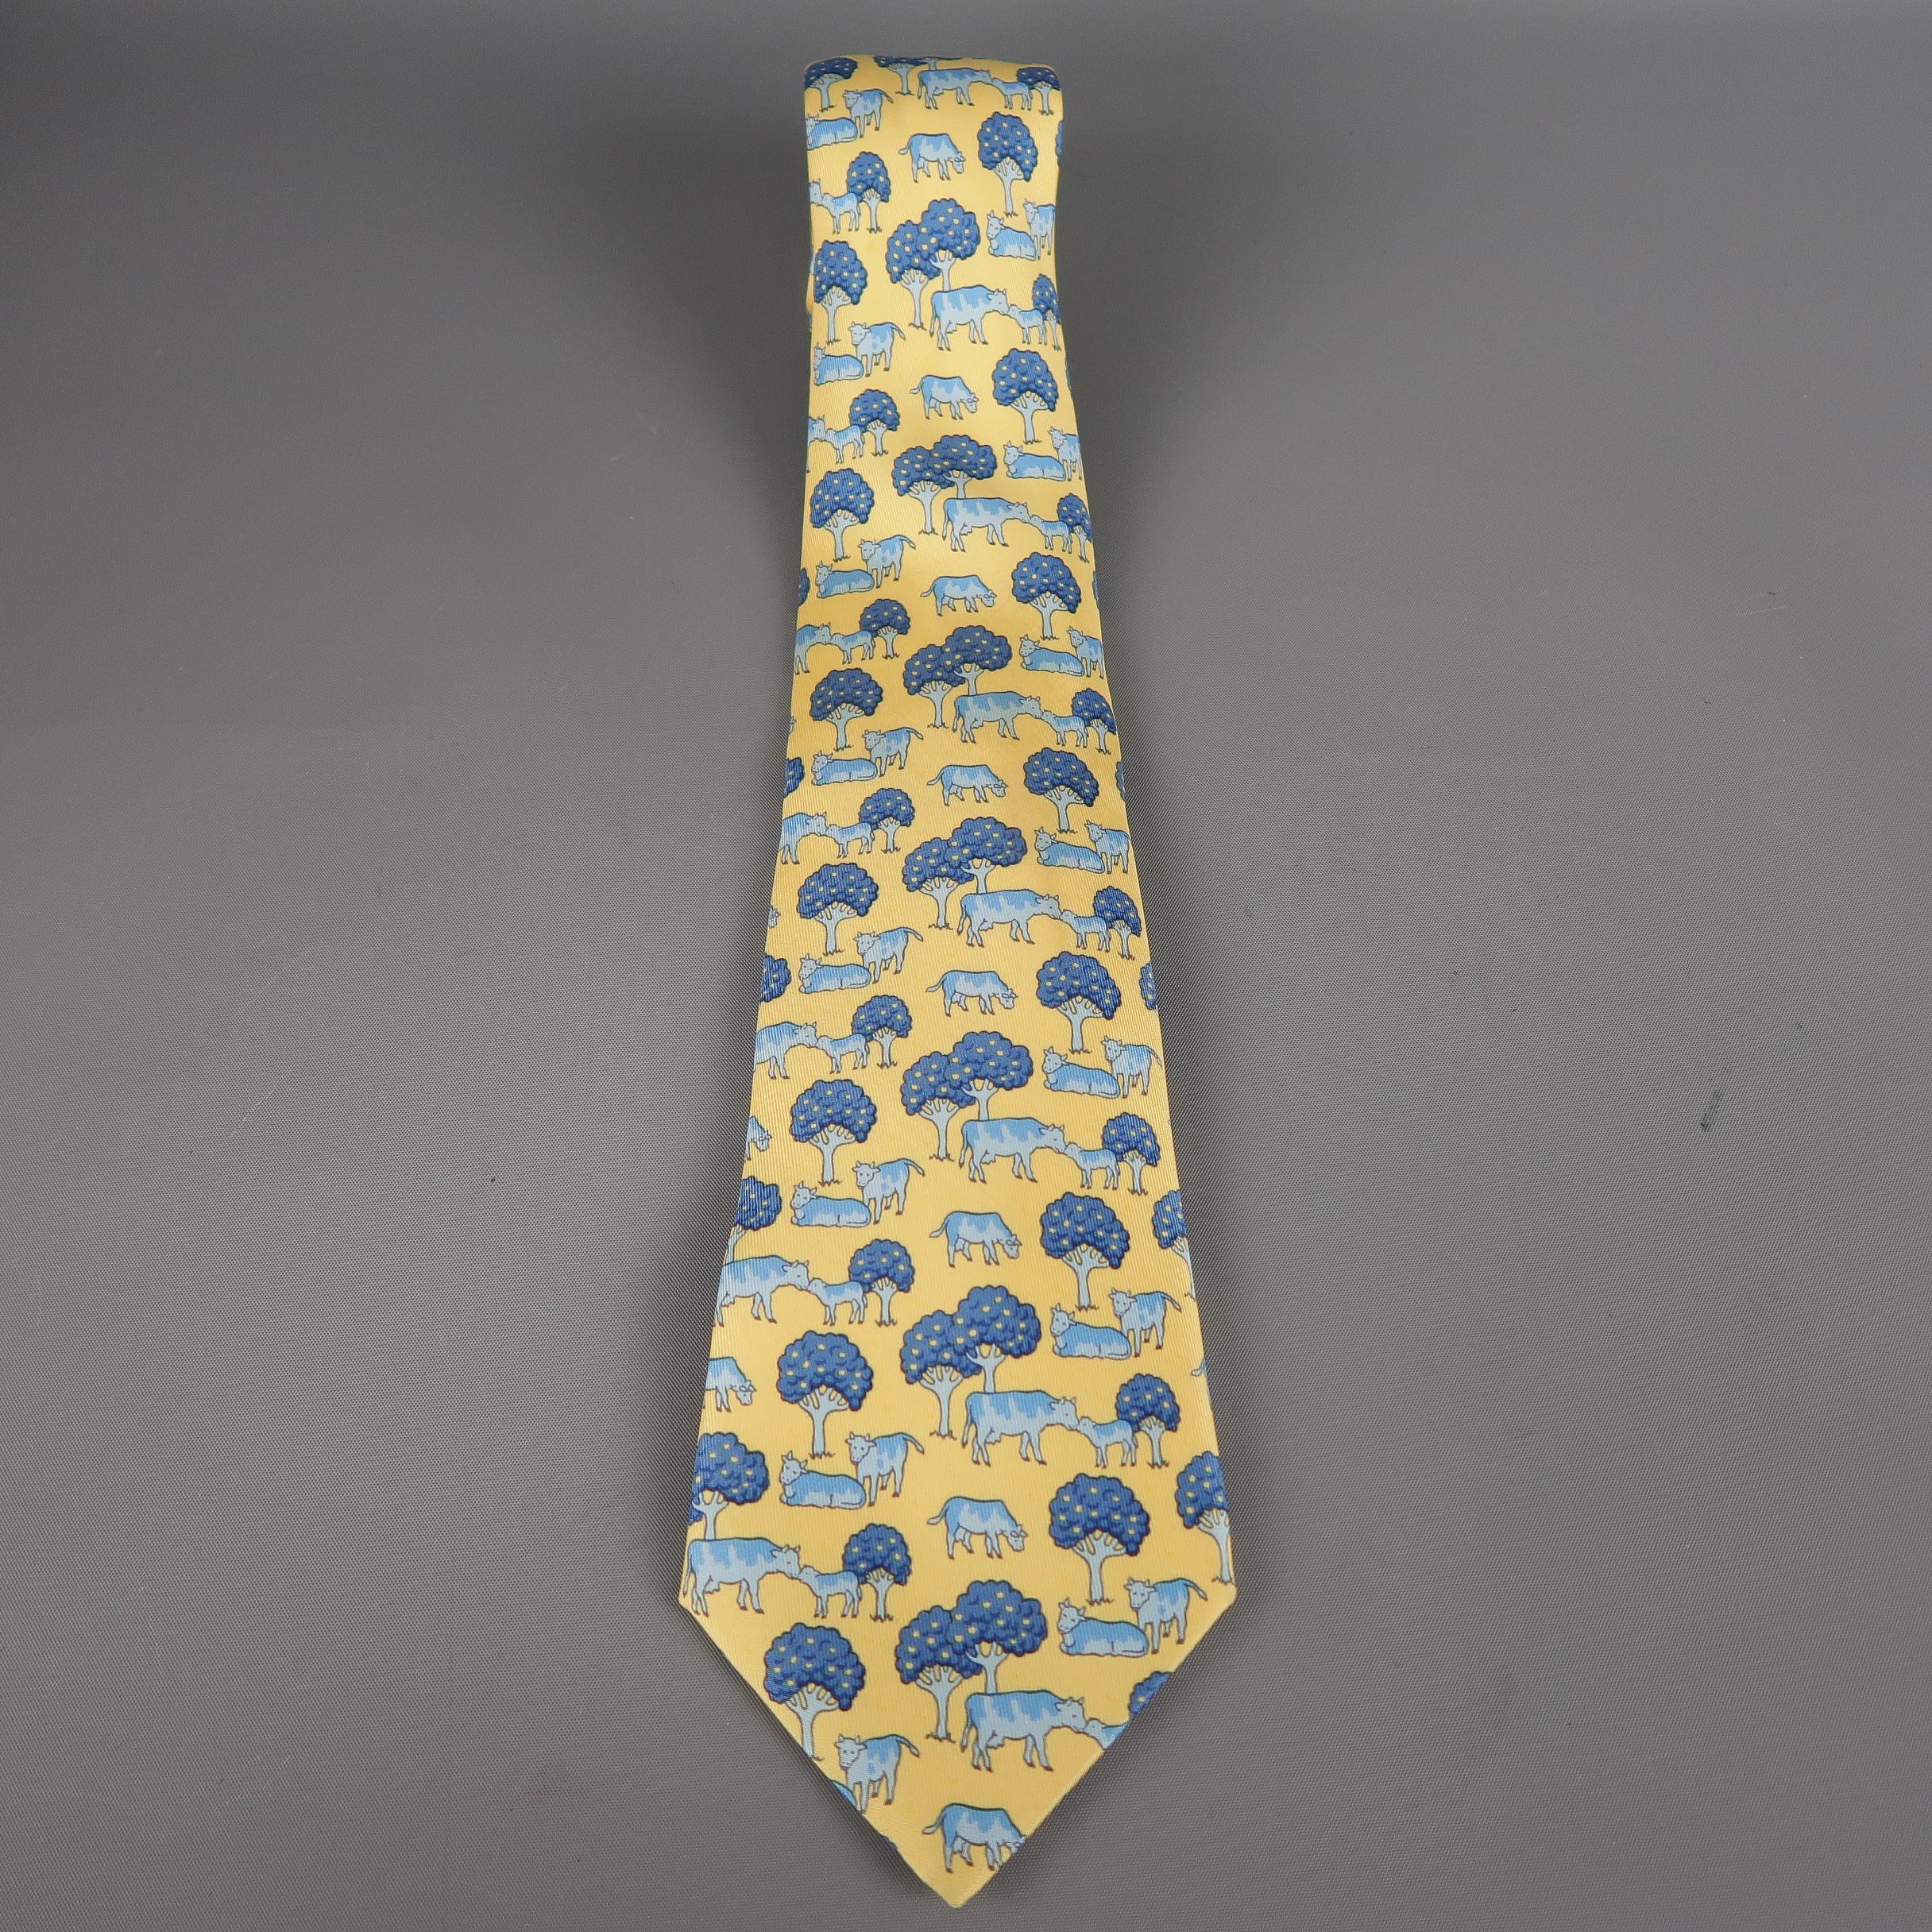 Yellow and blue silk necktie by HERMES.  This piece comes in an all-over cow and tree print.  Made in France.
 
Excellent Pre-Owned Condition.
 
Marked As: 7527 IA